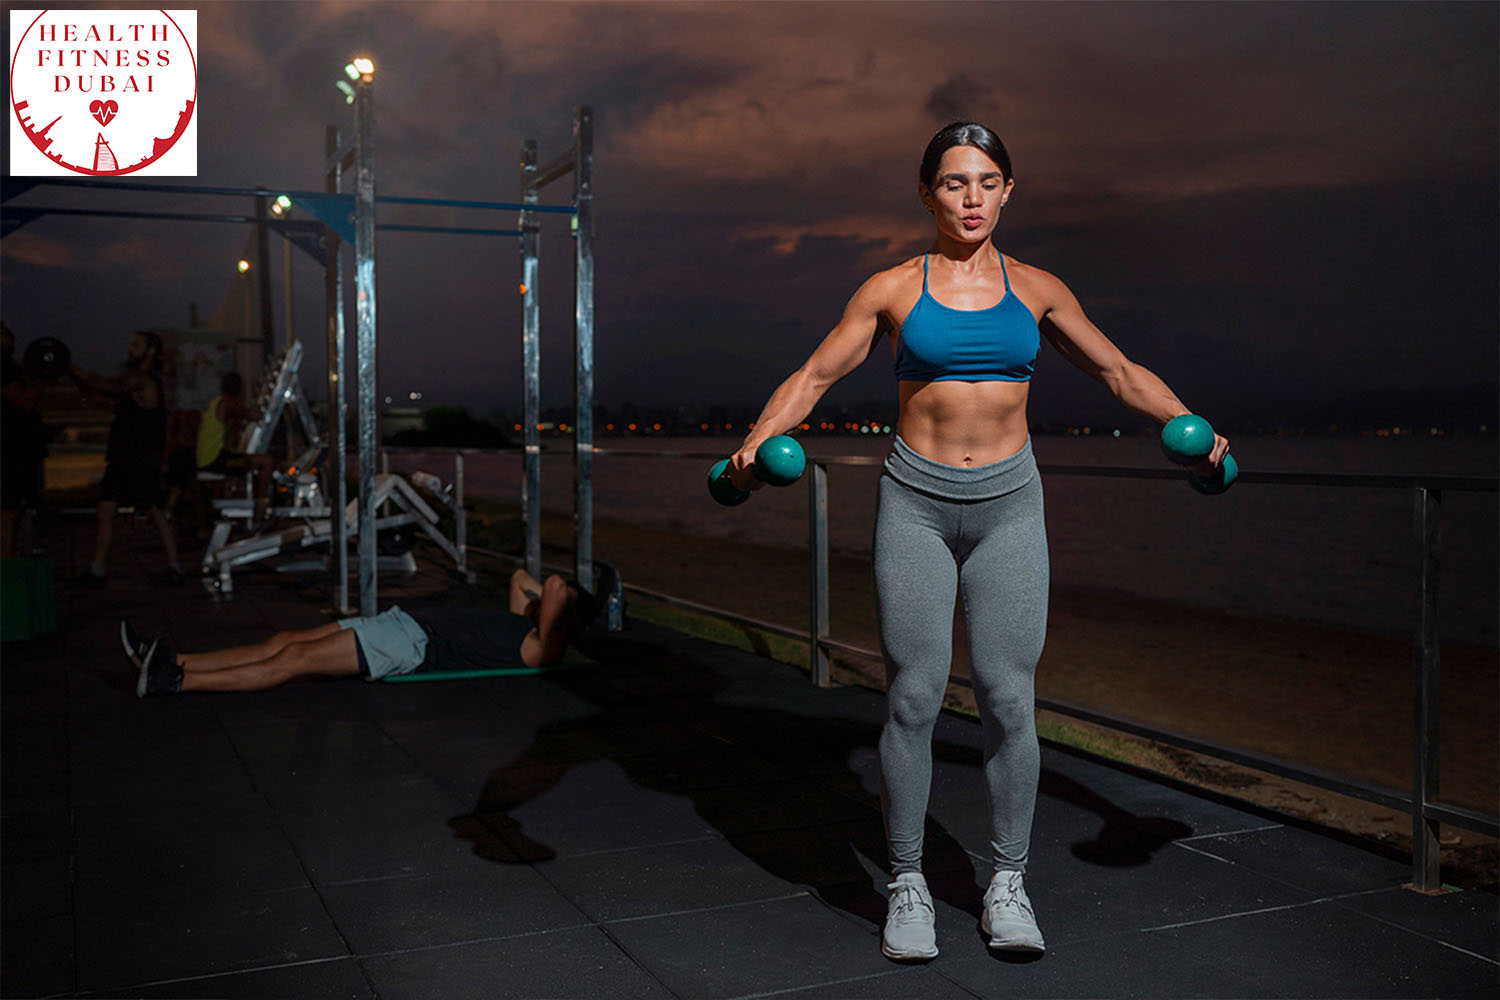 Can Workout Help To Gain Weight - Health Fitness Dubai - Personal Trainers Nutritionists Dietitians Coaches Wellness Centers Gyms Restaurants Bakeries - 3